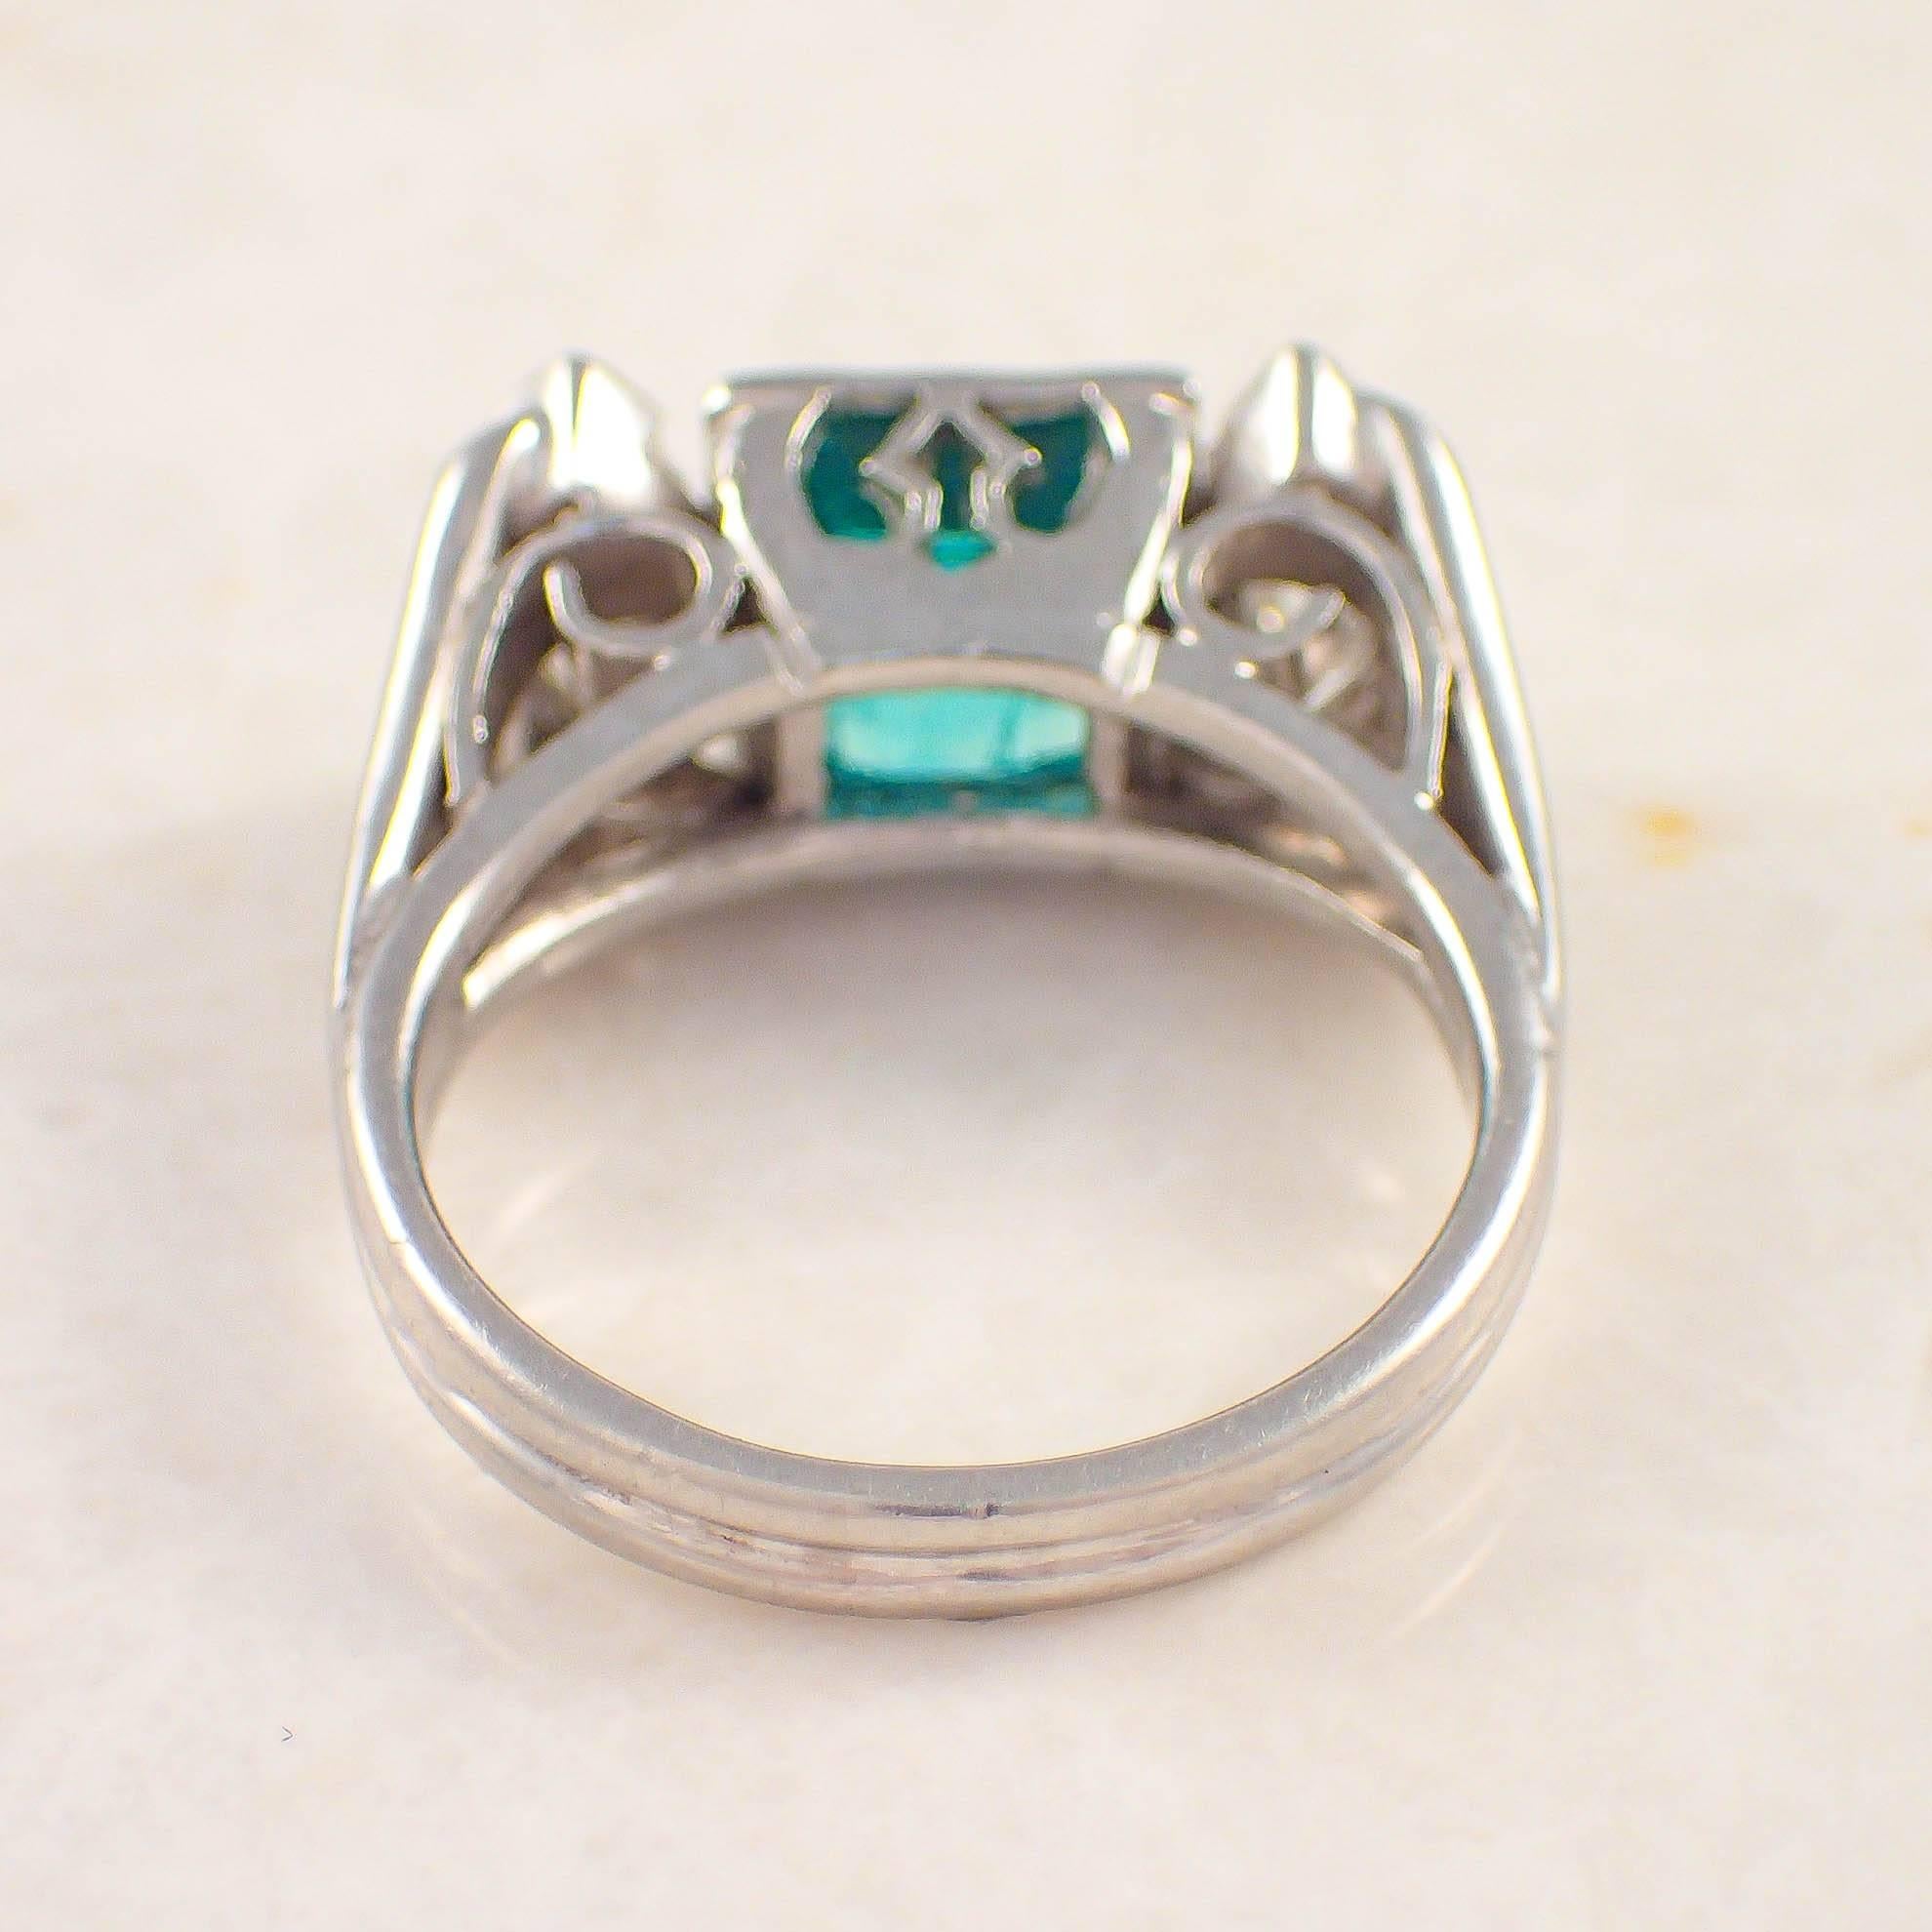 Platinum emerald and diamond ring. The open work setting is centered with one approximately 1.62 carat square cut emerald measuring 6.9 X 6.7 X 5.4 mm, flanked by two long hexagon cut diamonds weighing approximately .70 carat total.

Color: